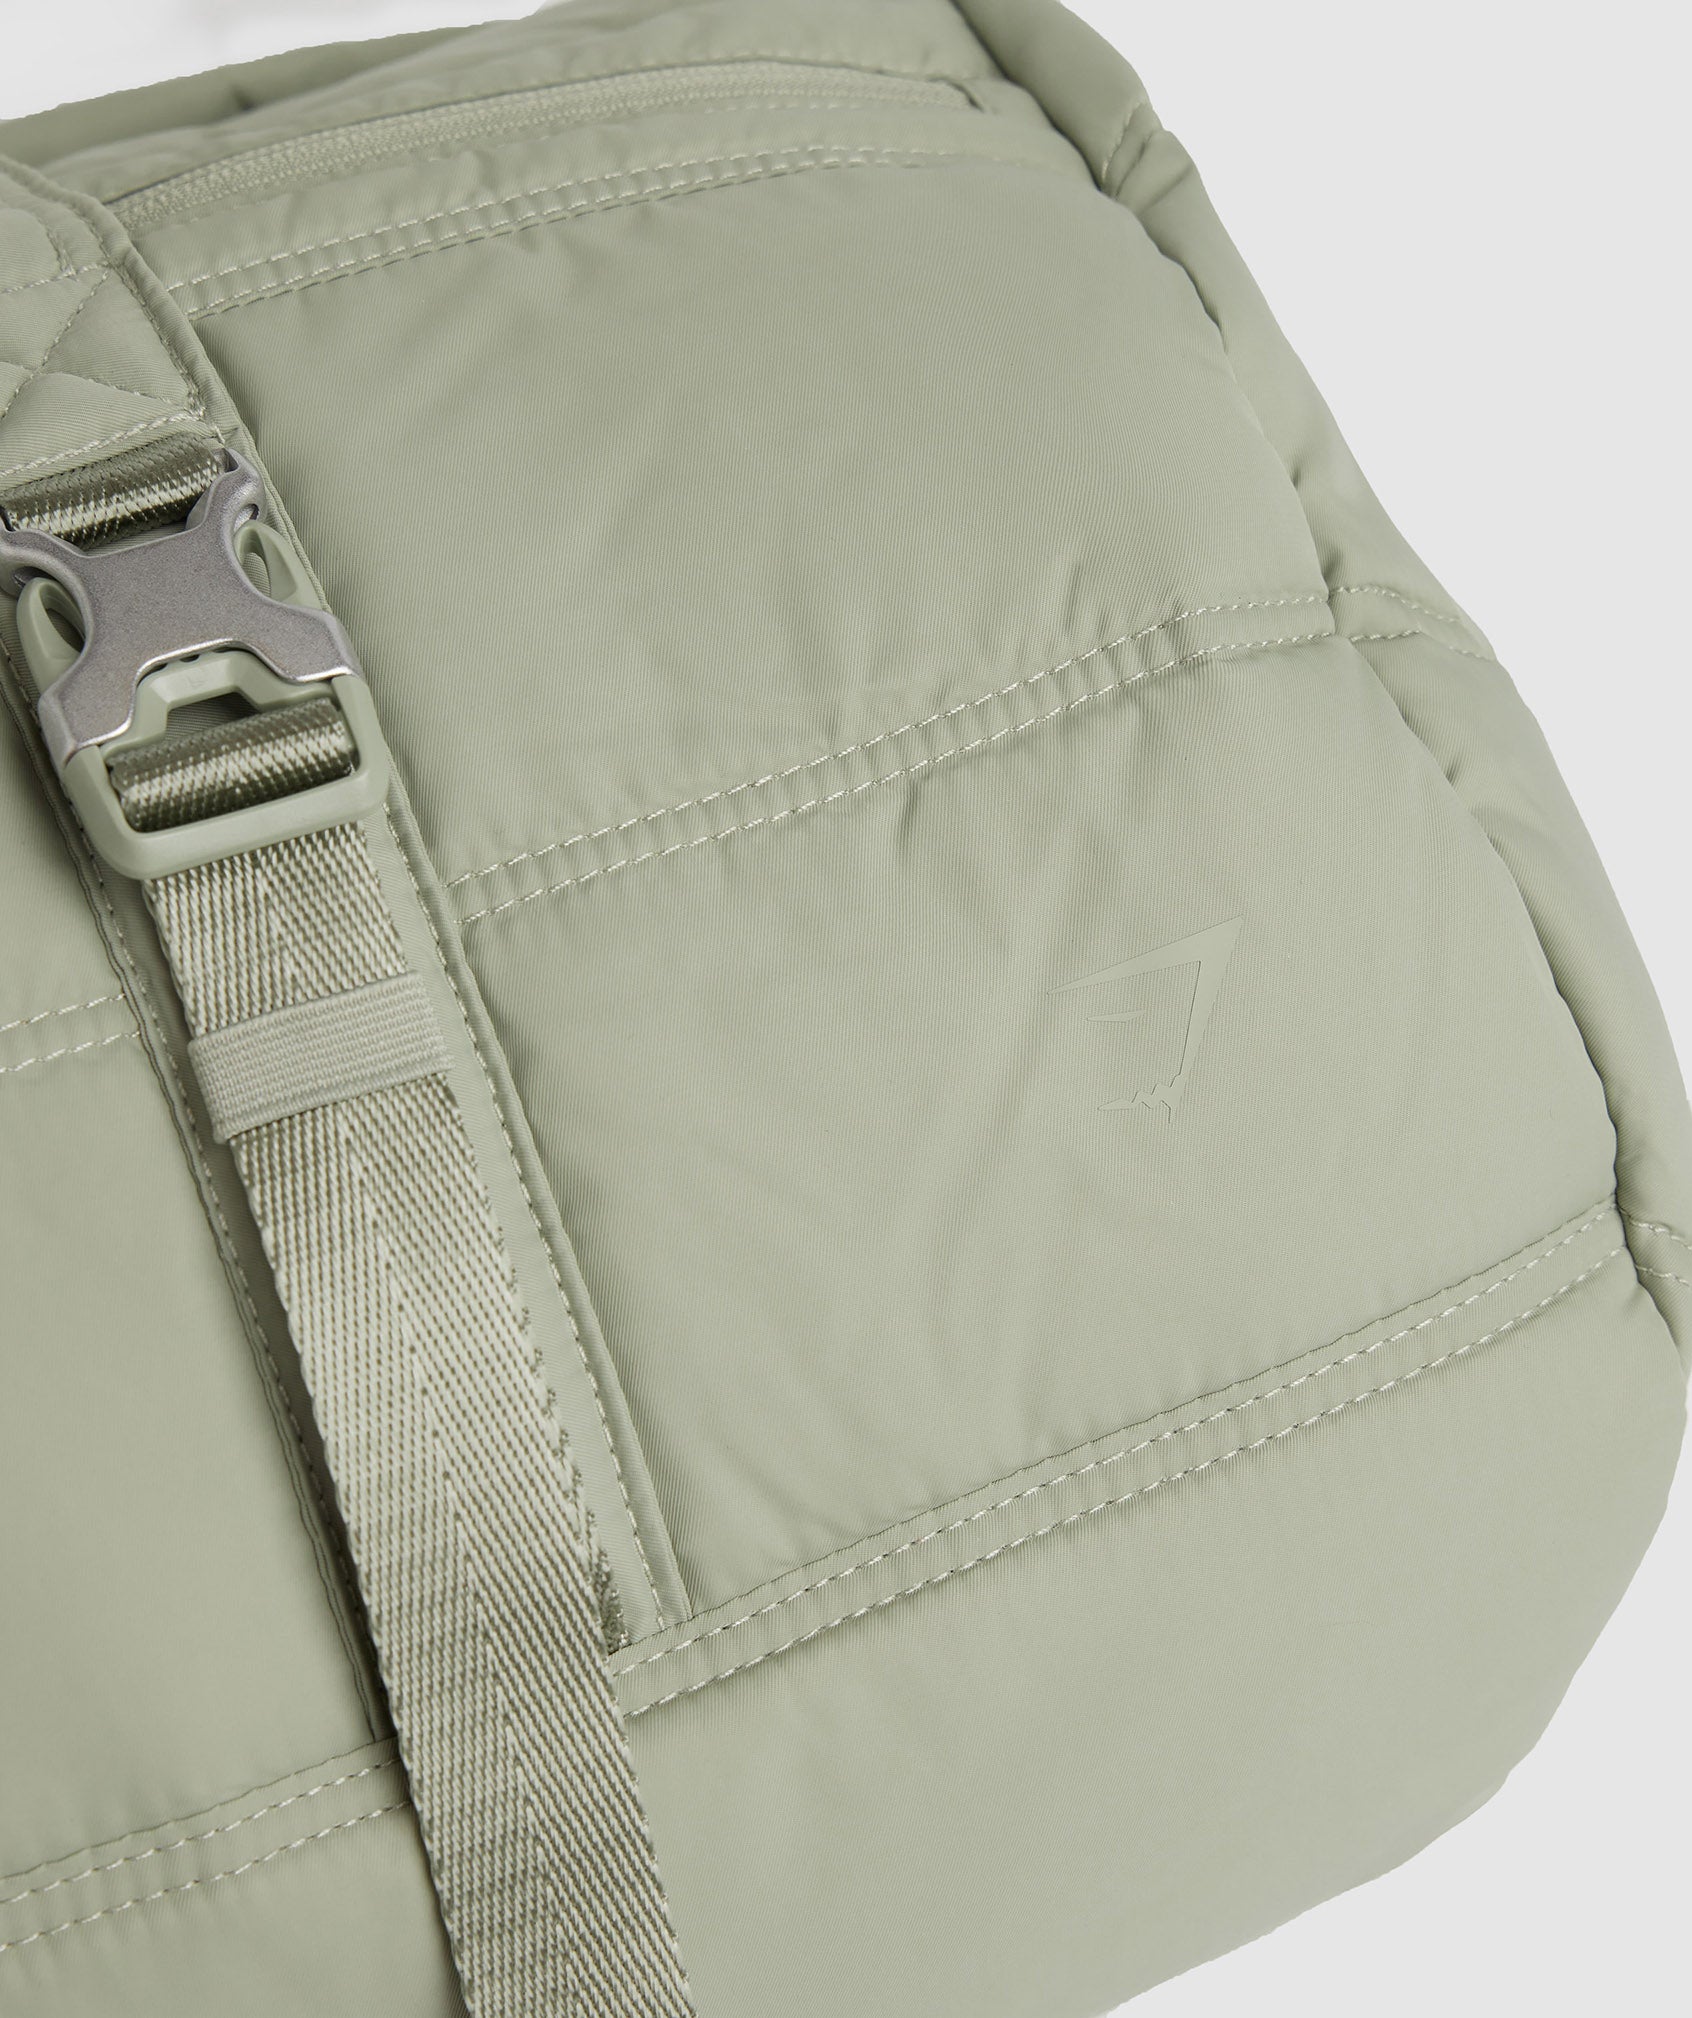 Premium Lifestyle Barrel Bag in Light Olive Green - view 4